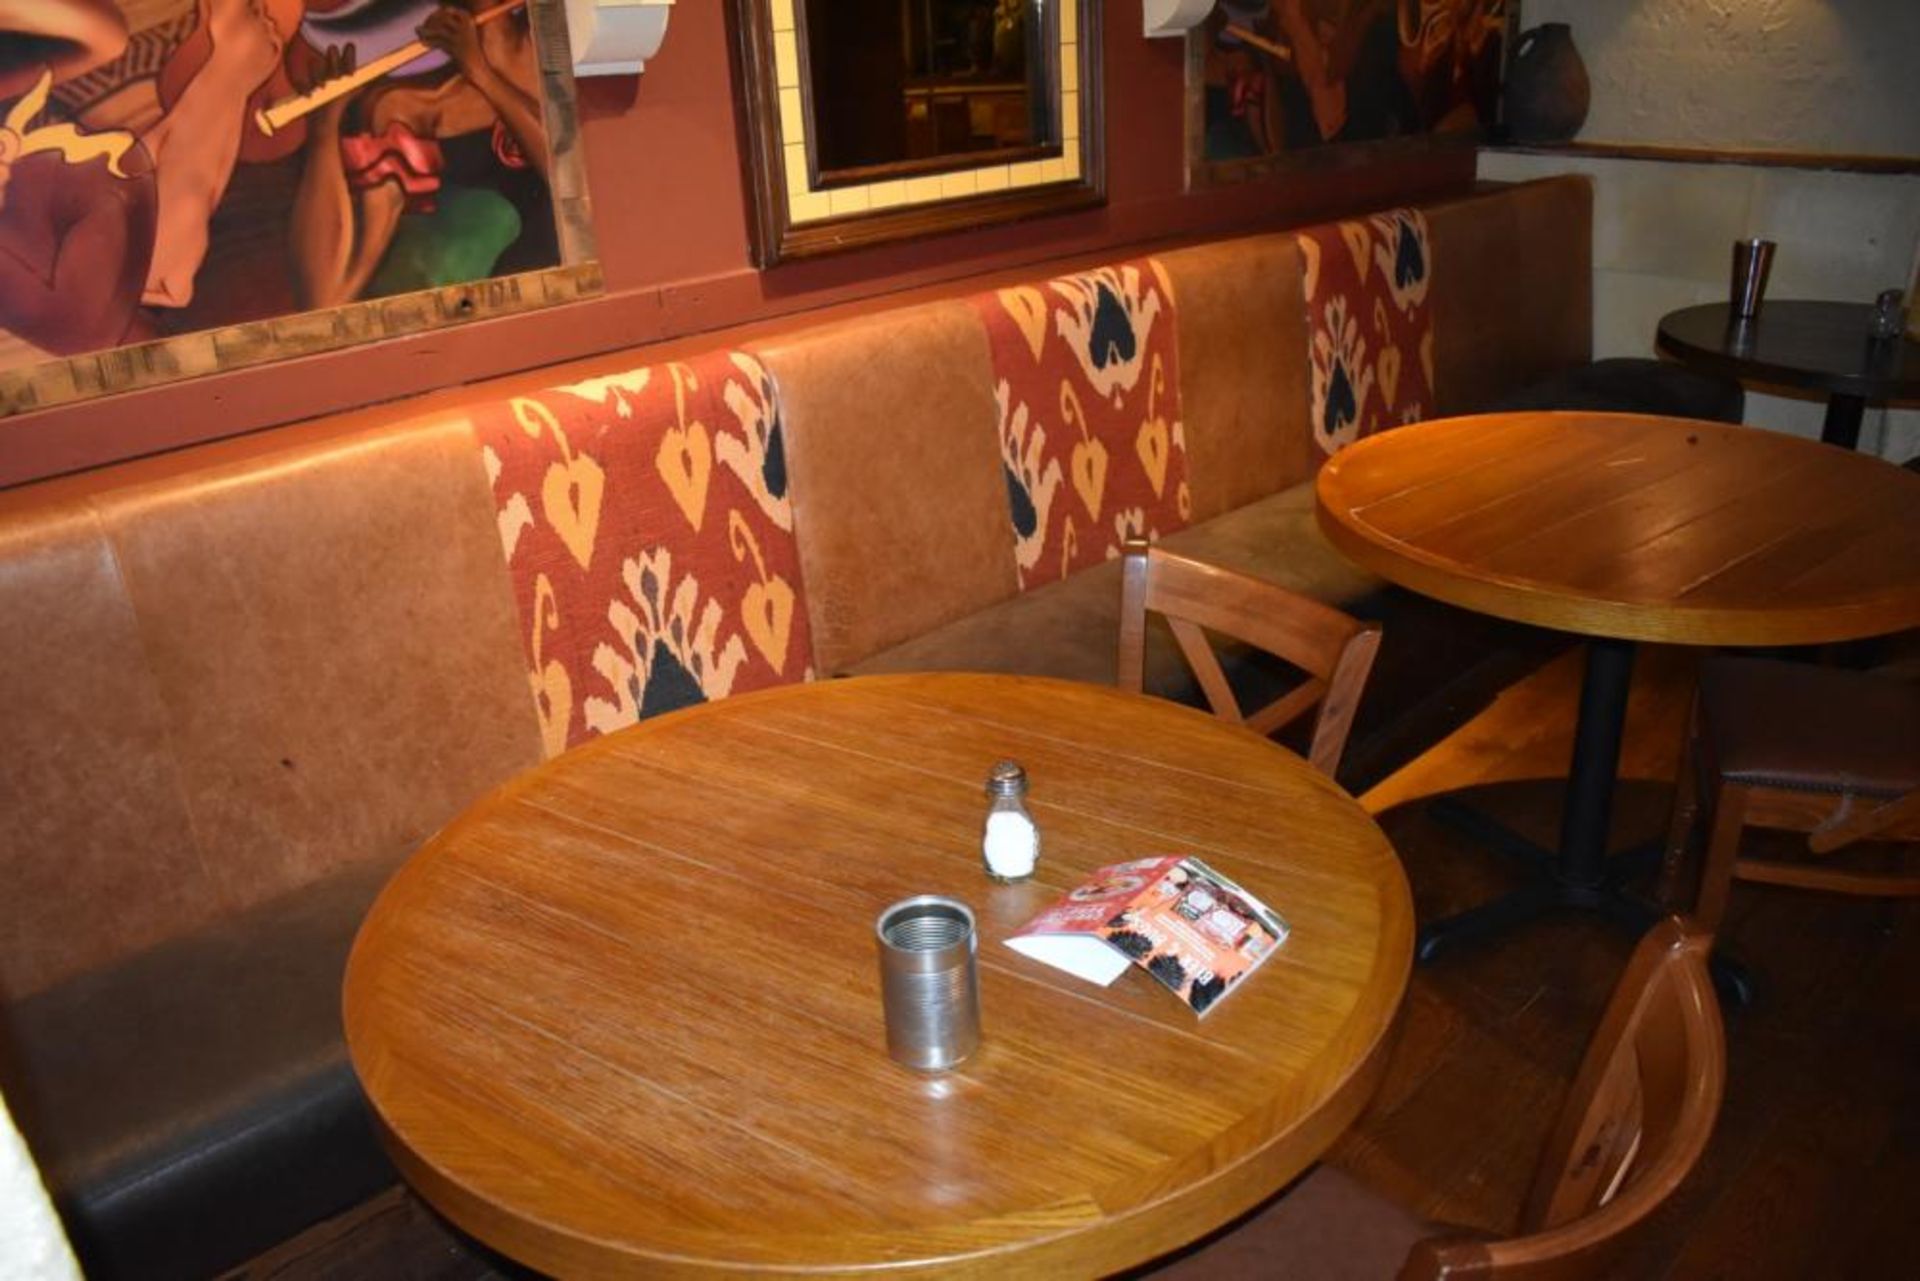 1 x Long Seating Bench From Mexican Themed Restaurant - CL461 - Ref PR889 - Location: London W3 - Image 7 of 7